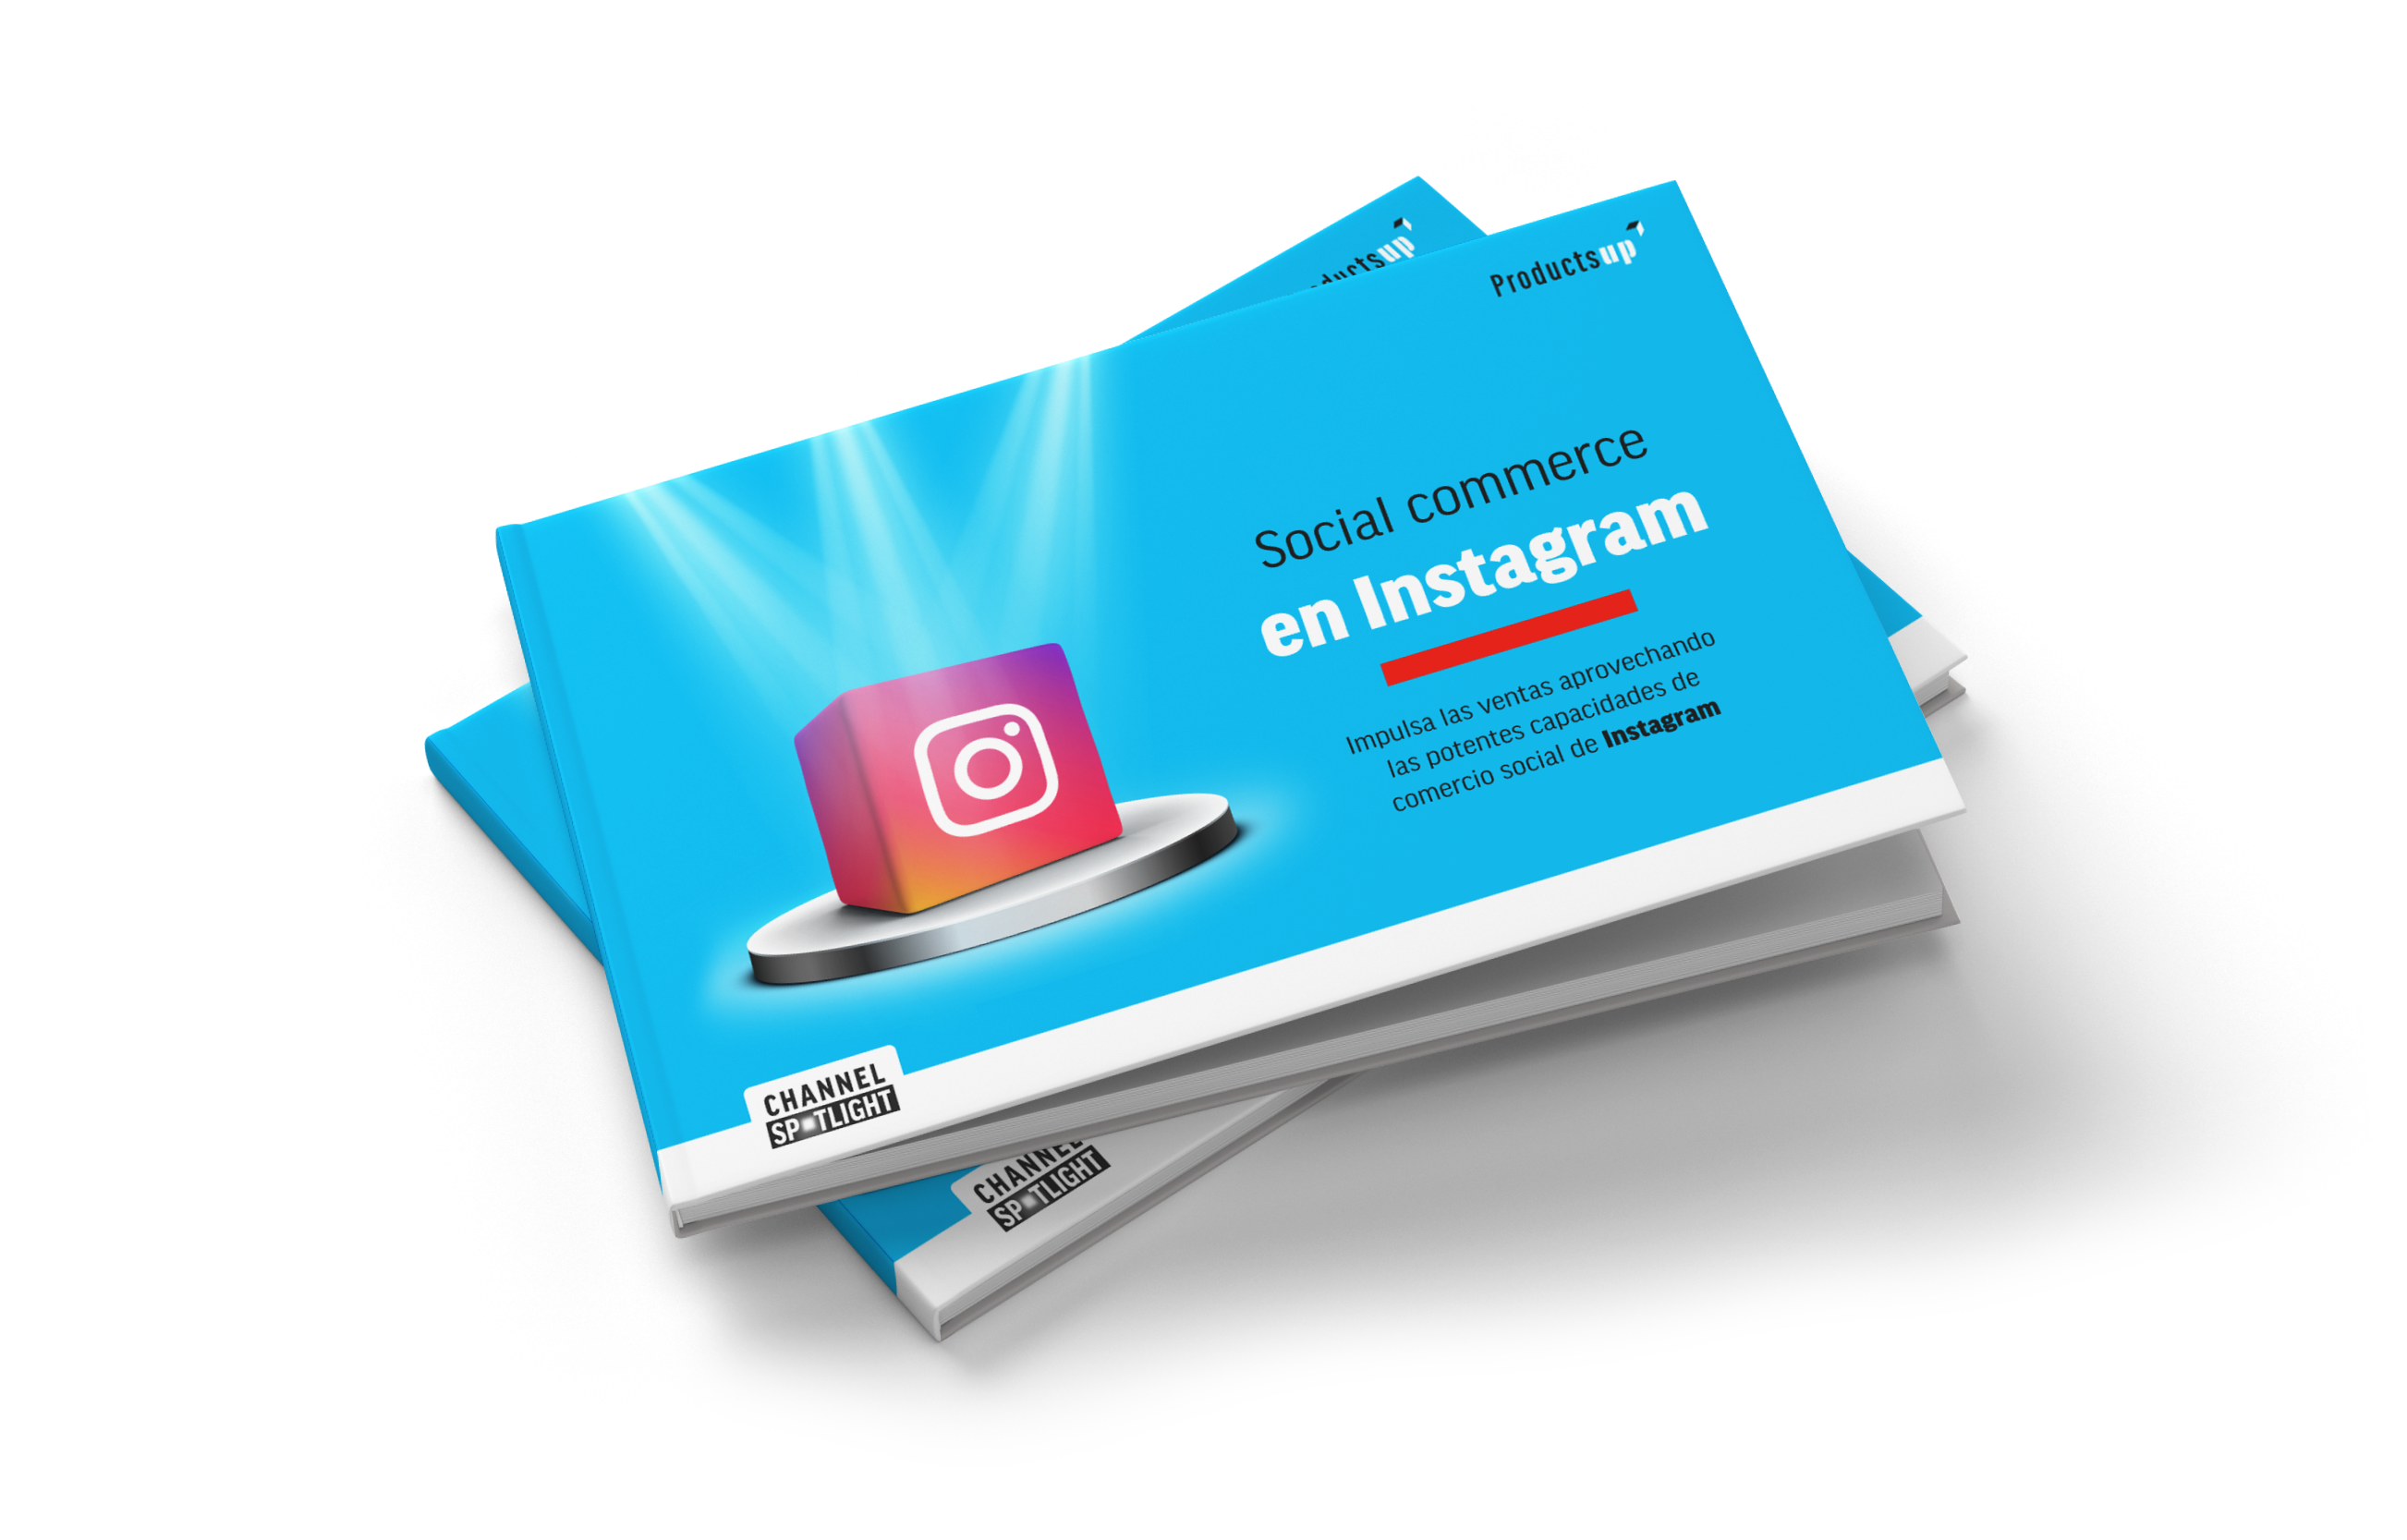 ES Instagram Guide banners Mockup 1250x800px